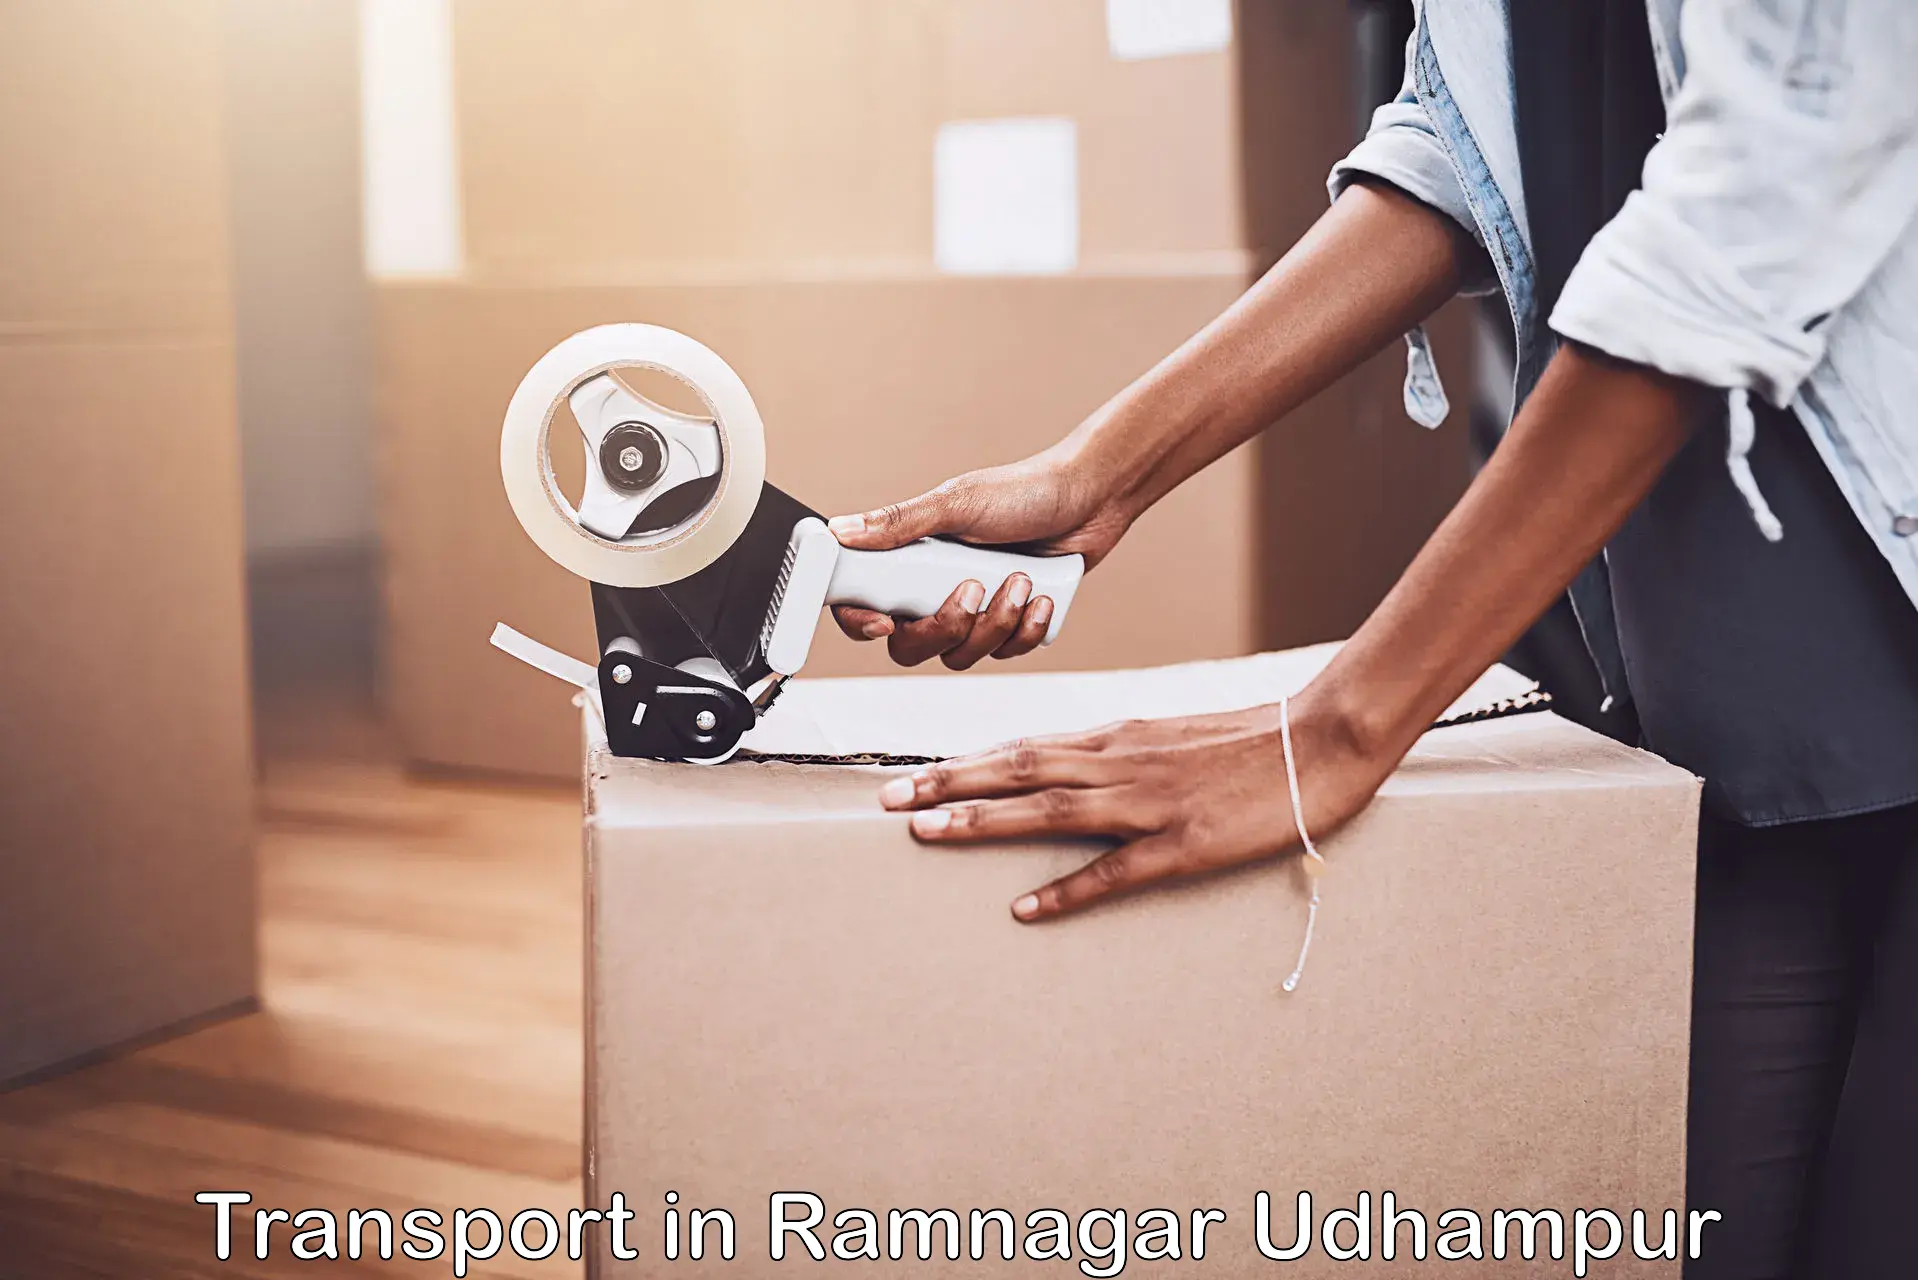 Goods delivery service in Ramnagar Udhampur